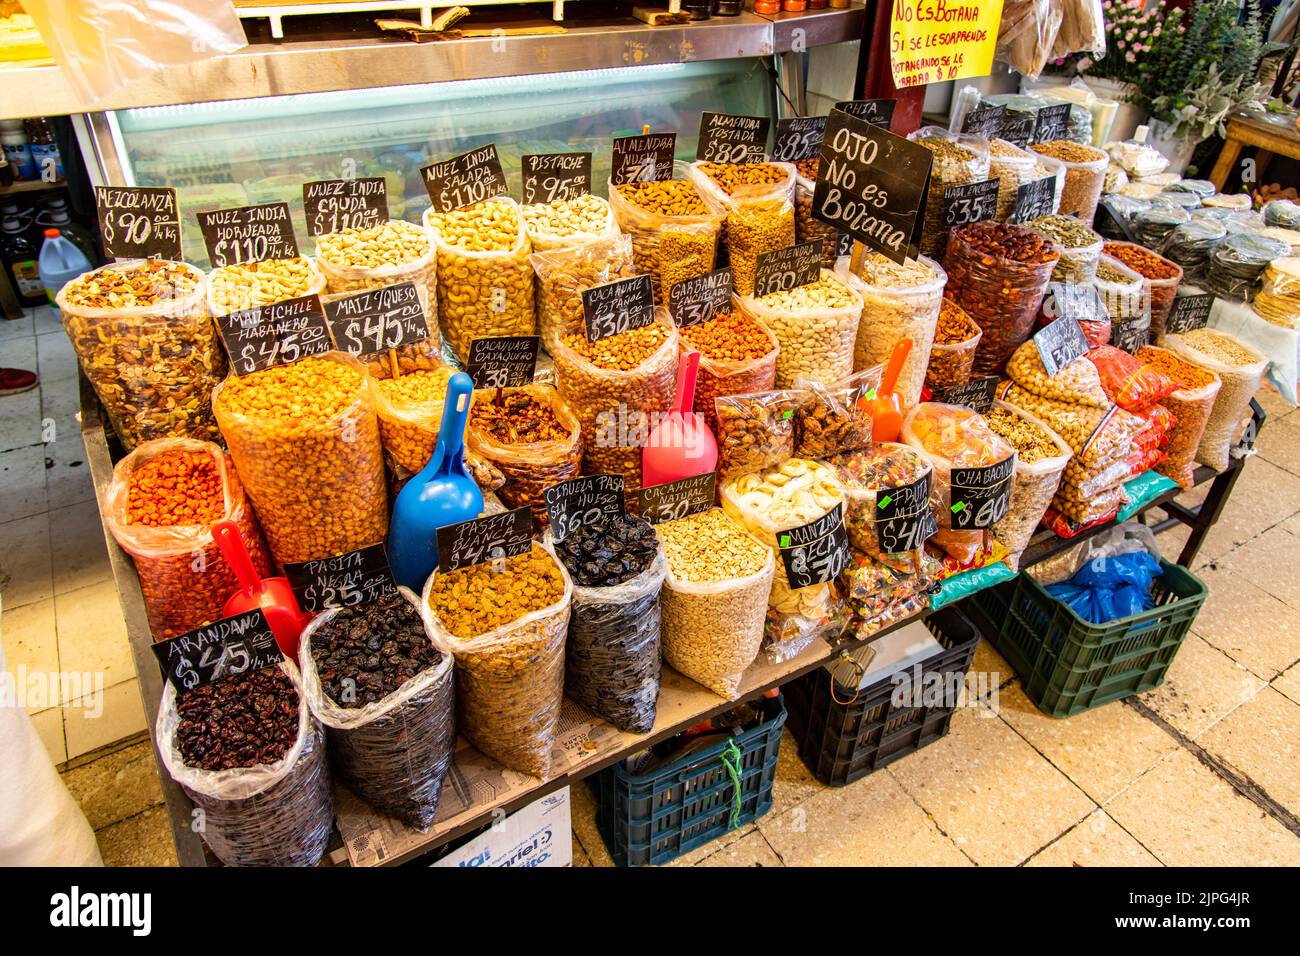 Various nuts, dried fruits and legumes being sold at Coyoacan Market in Mexico City, Mexico Stock Photo